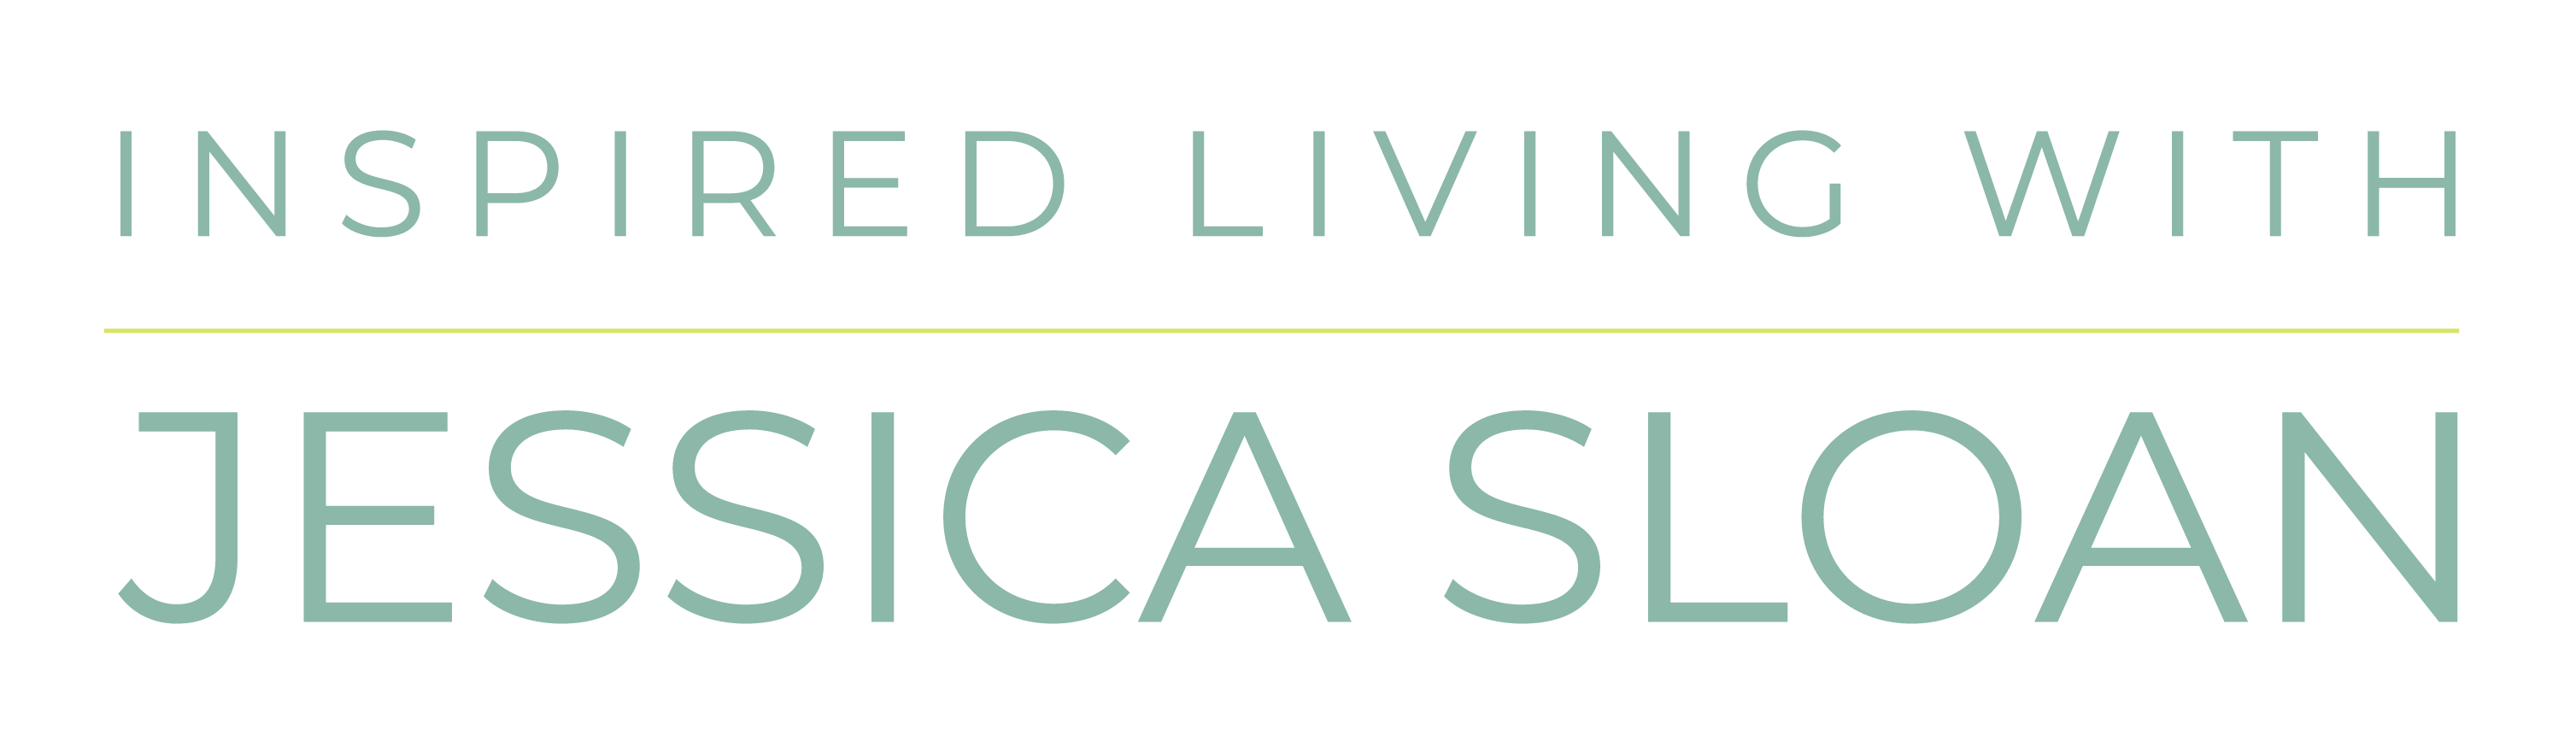 Inspired Living With Jessica Sloan